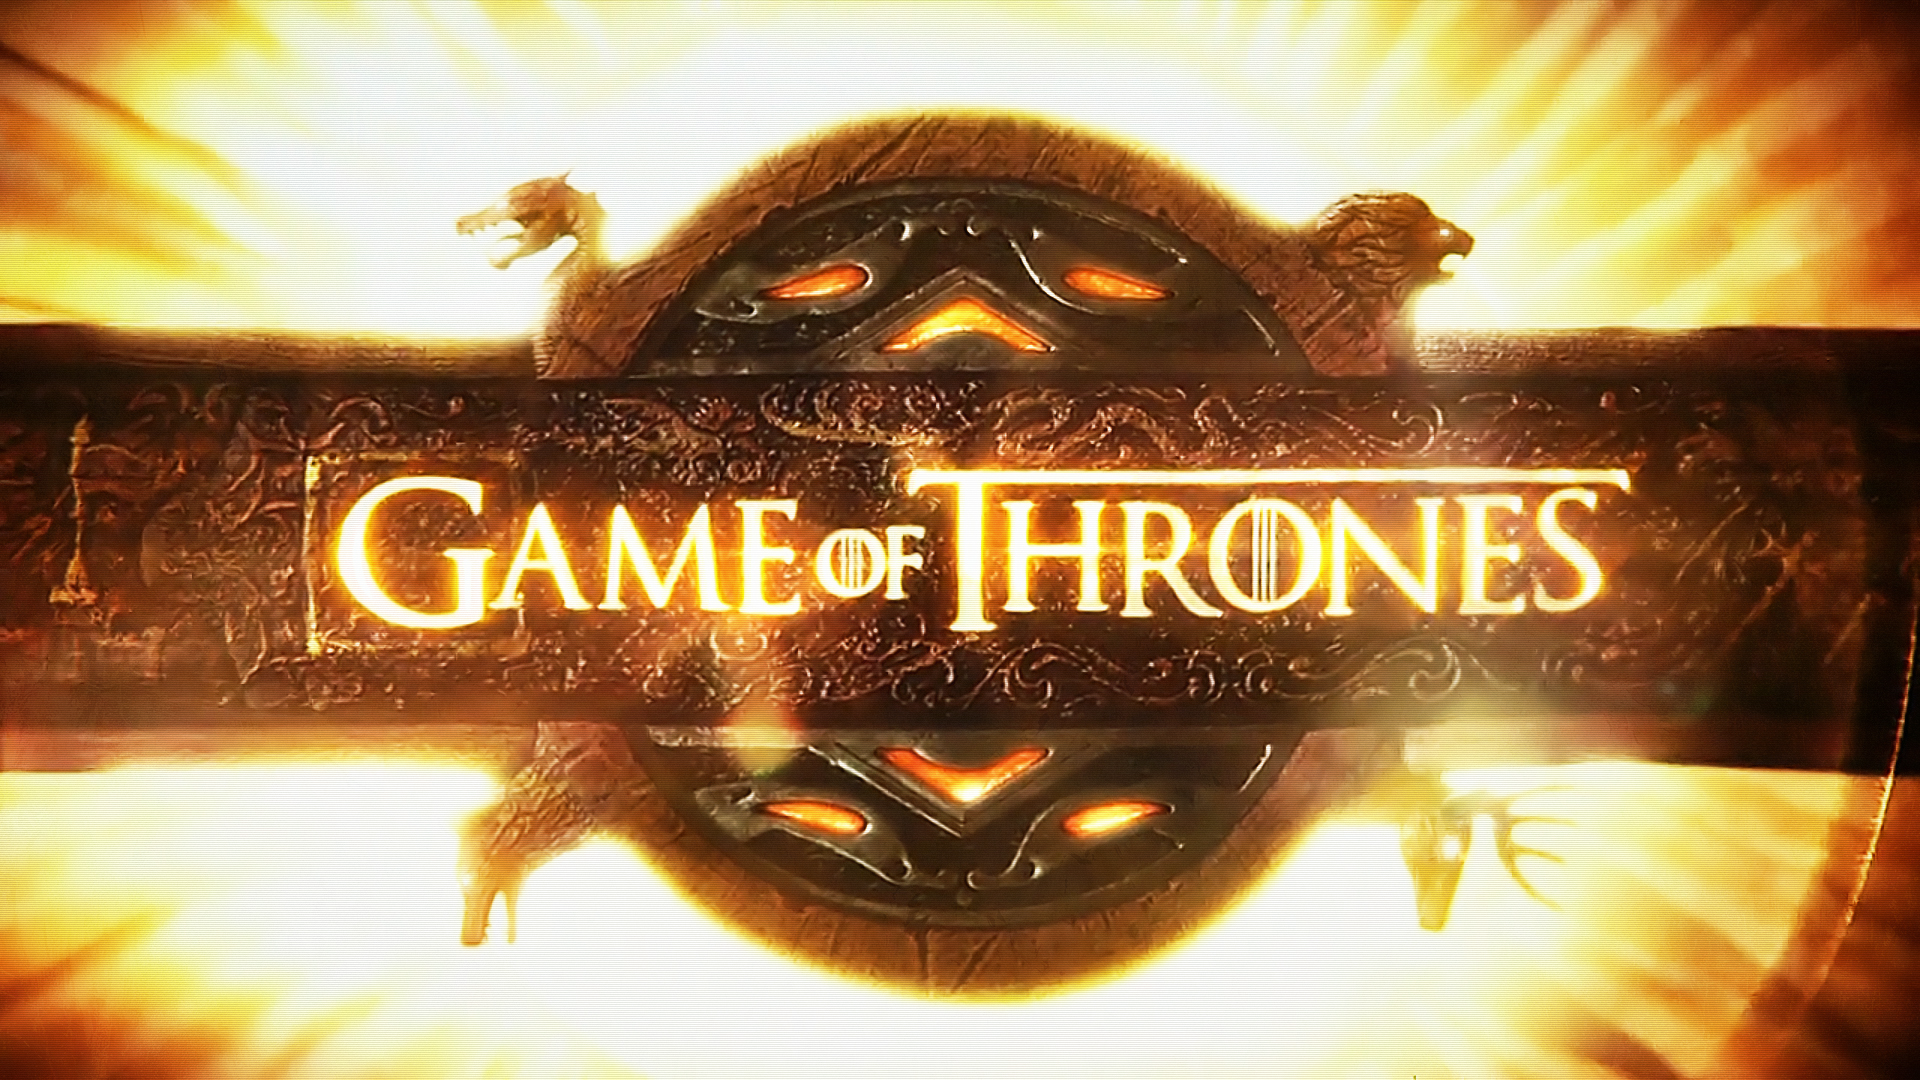 Game of Thrones, A Song of Ice and Fire, TV series, George R. R. Martin - desktop wallpaper